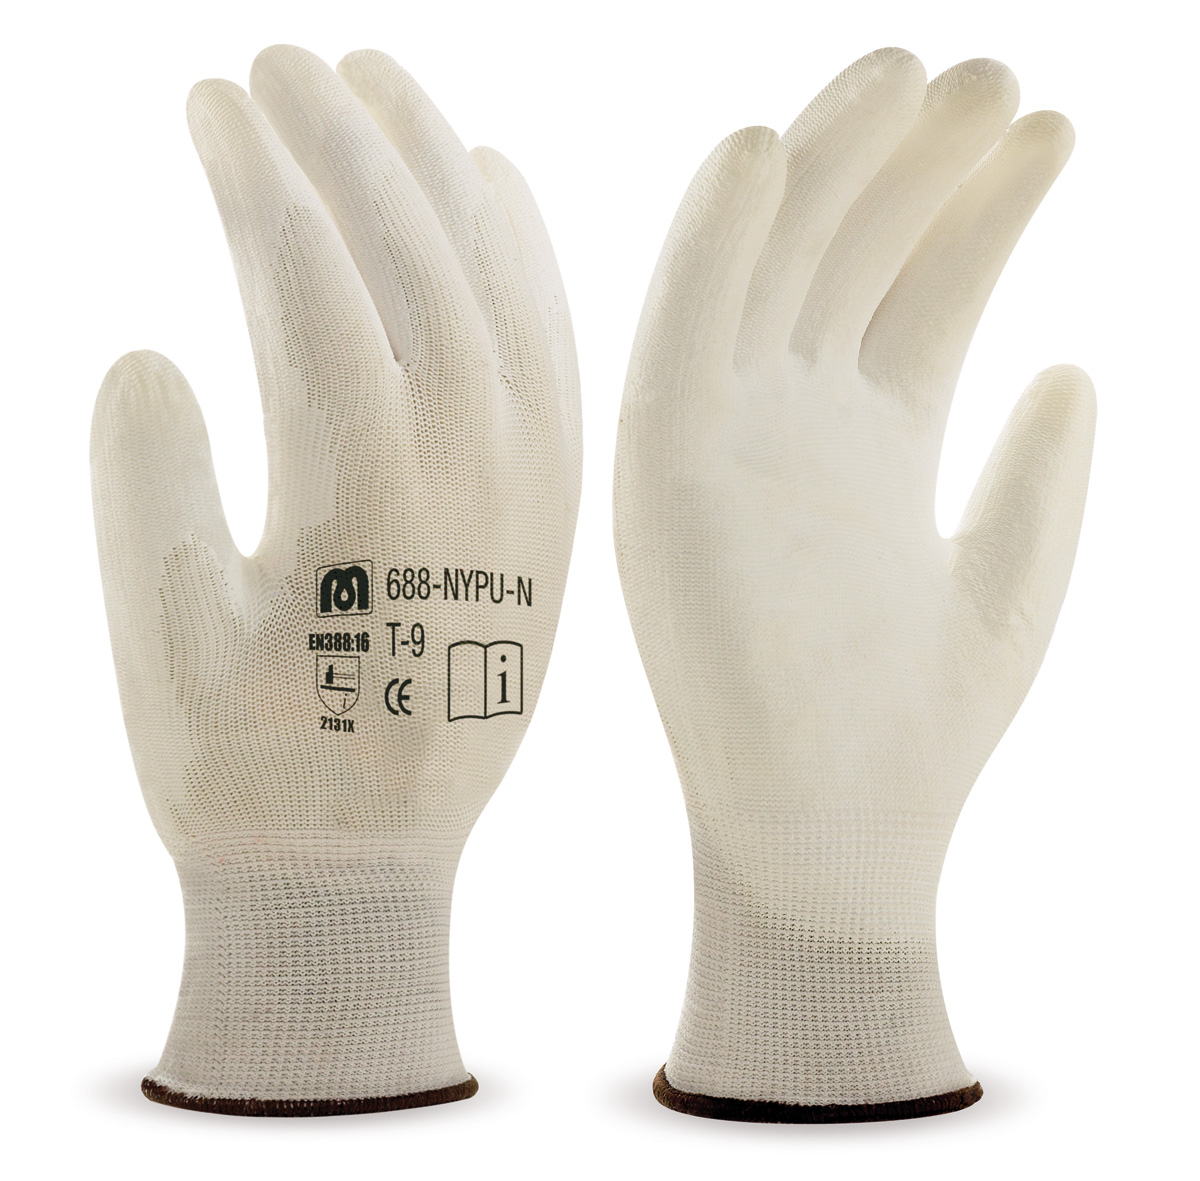 688-NYPU/N Work Gloves Nylon Seamless polyester glove with polyurethane-coated palm and fingers